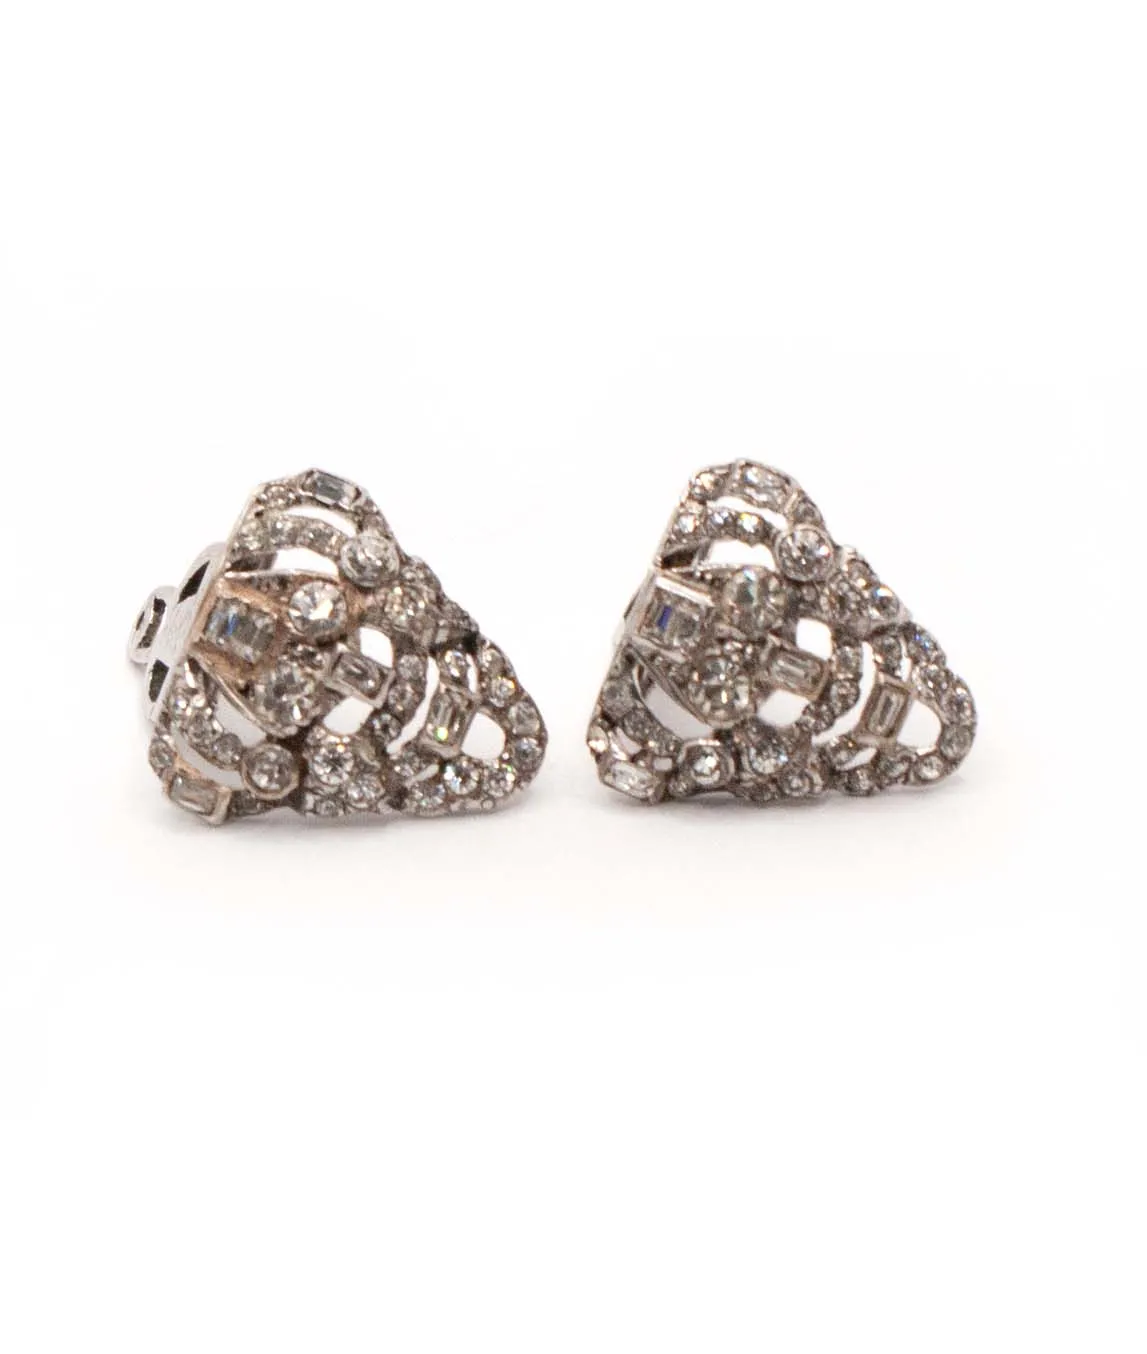 Two shield-shaped dress clips silver with clear crystals